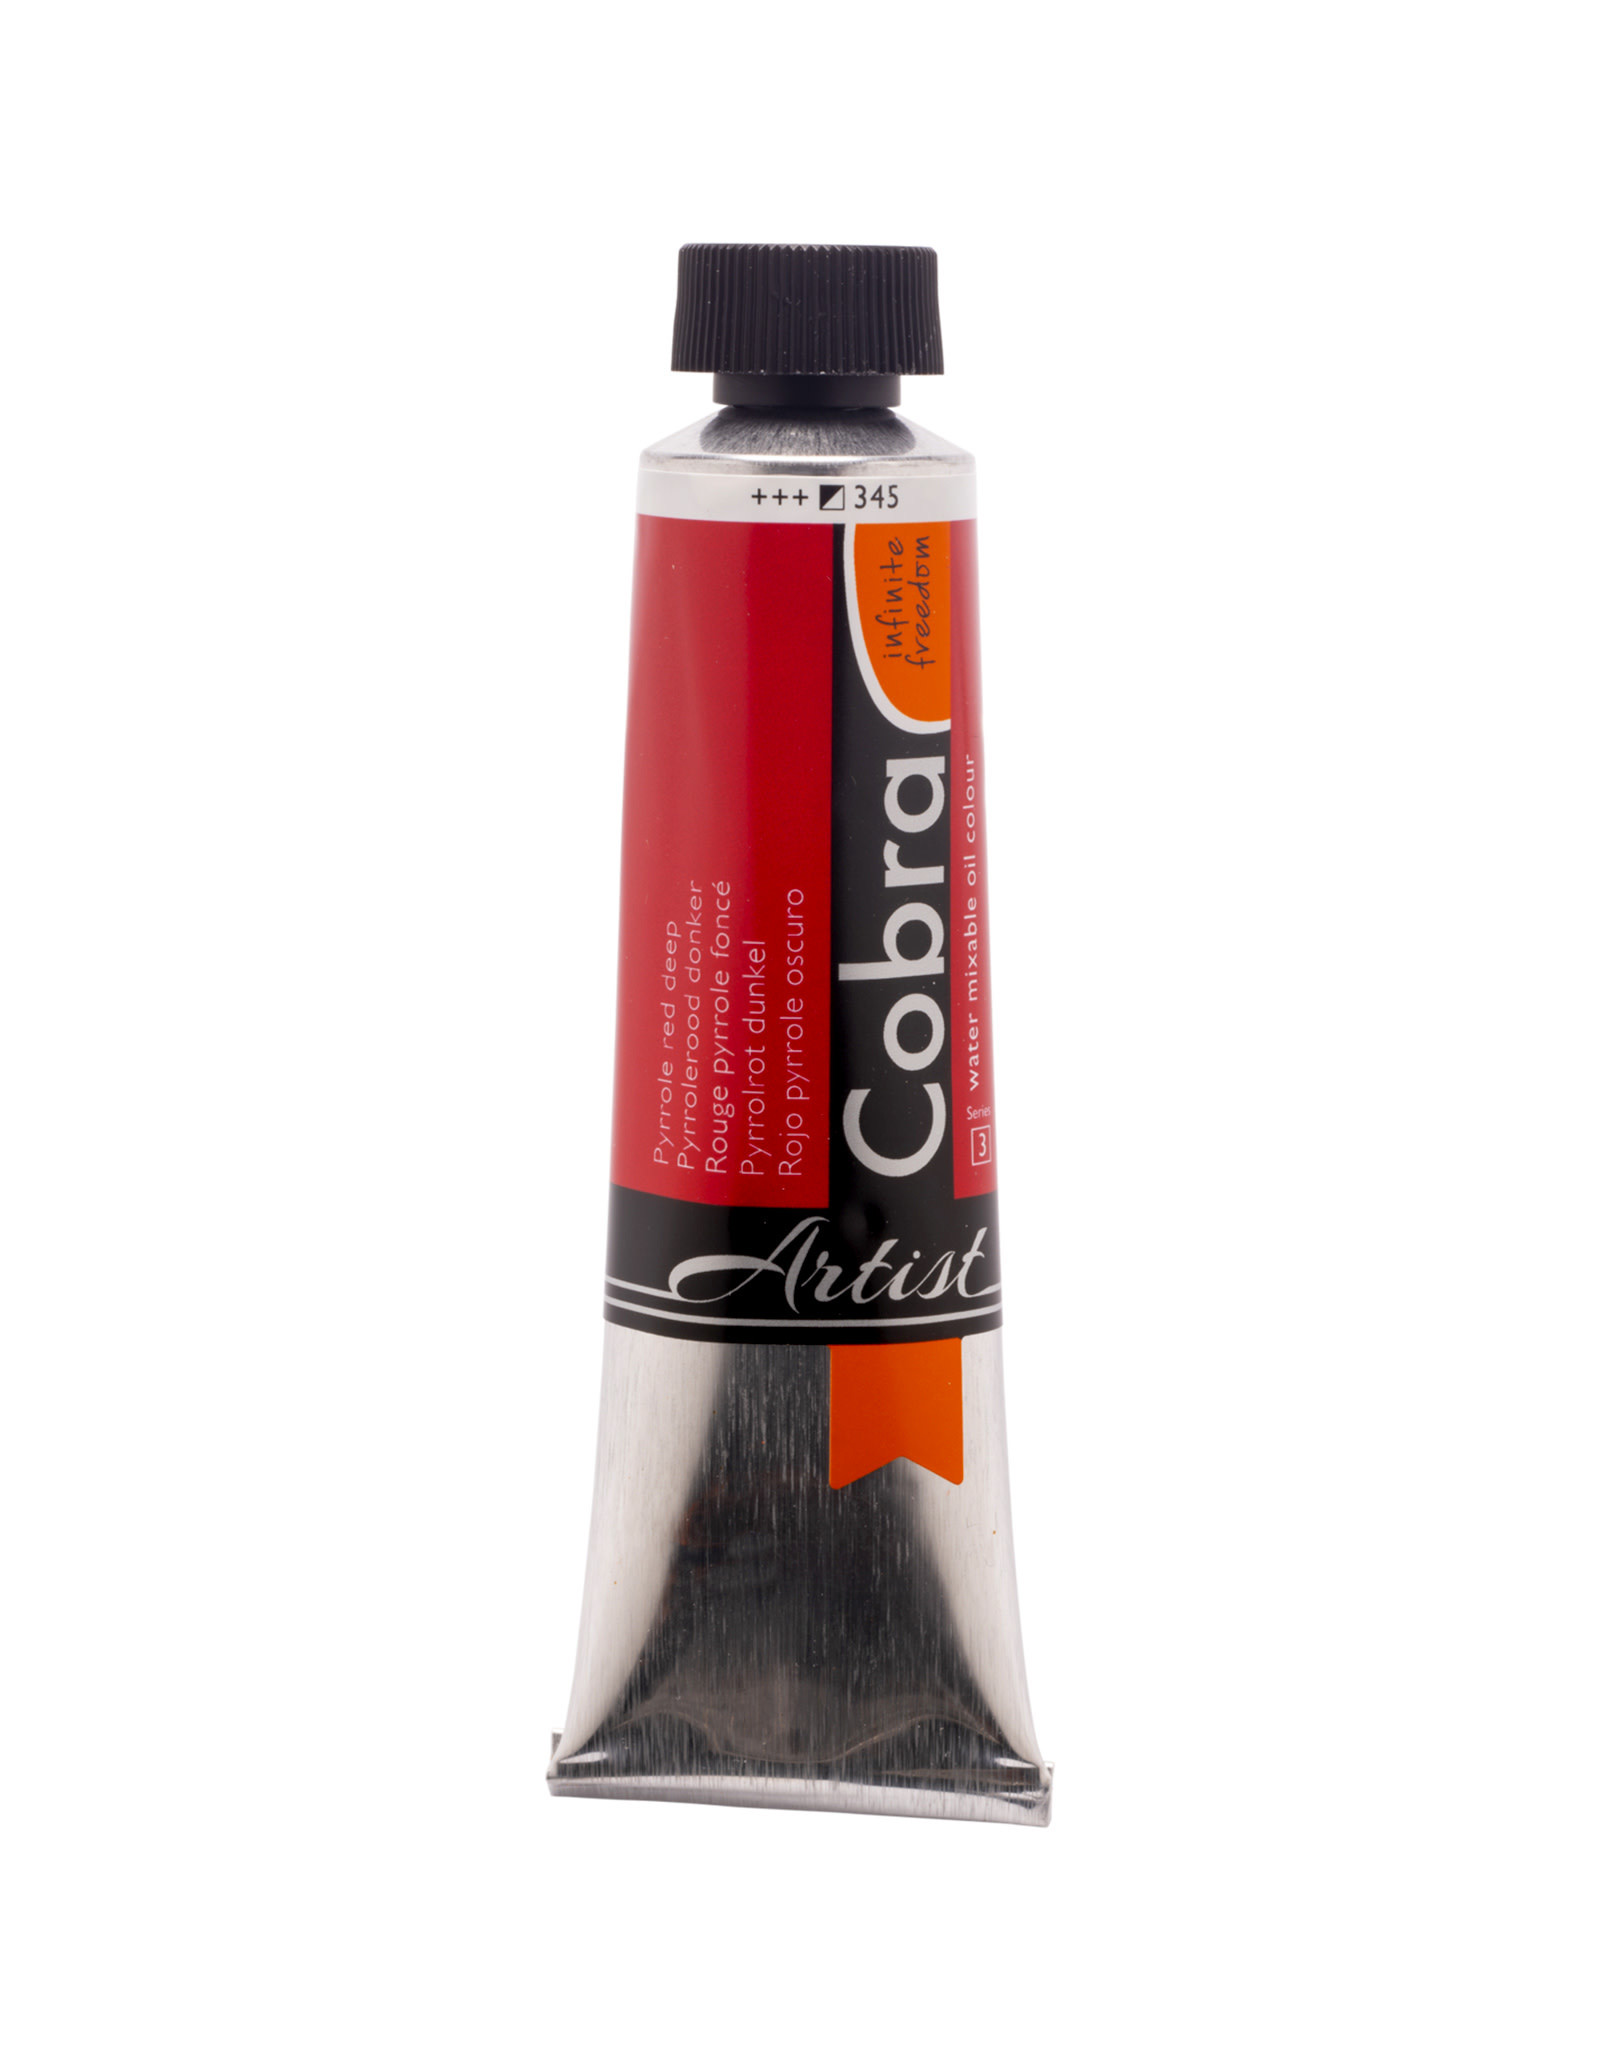 Royal Talens Cobra Water Mixable Artist Oils, Pyrrole Red Deep 40ml